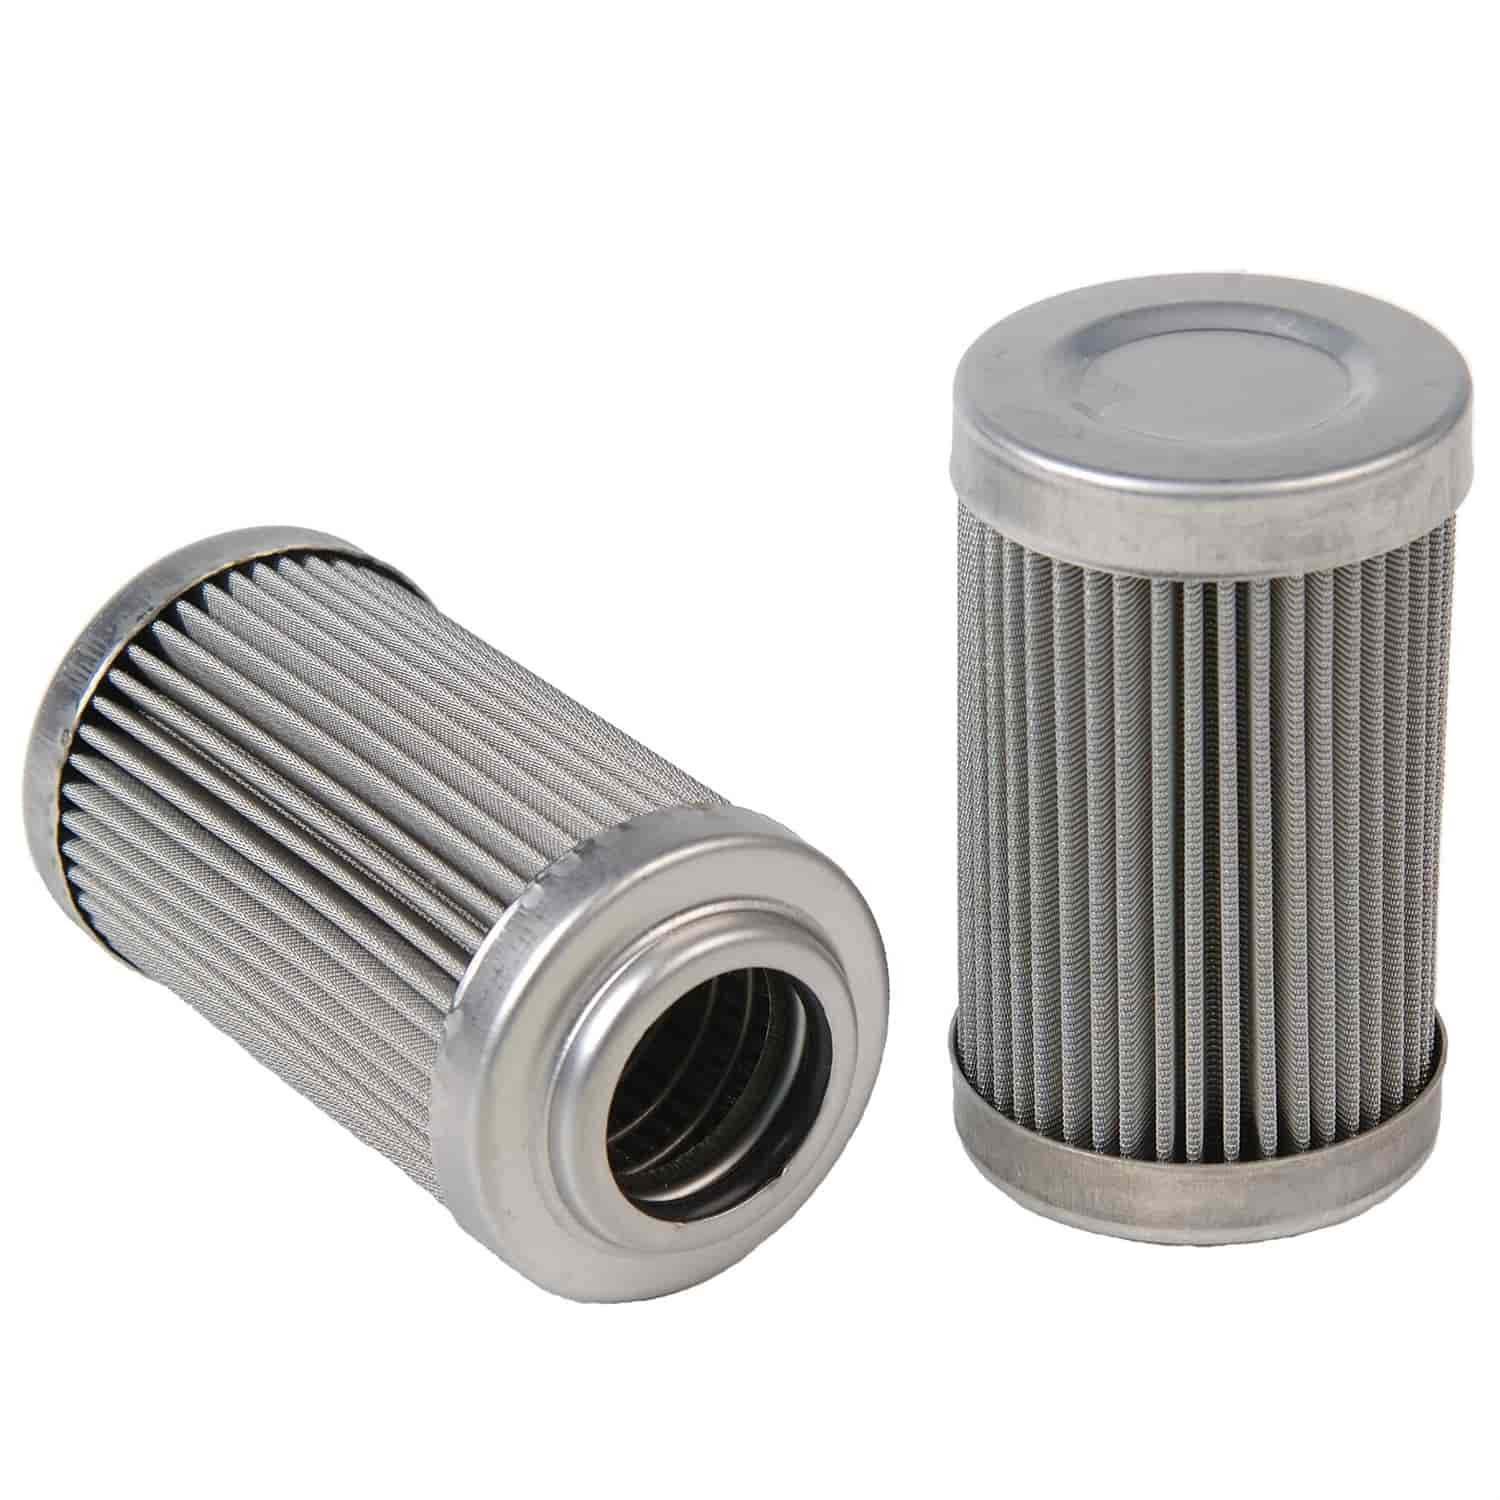 Replacement Fuel Filter Element 100 micron for part #027-12304, 12331, 12307, 12324, 12354